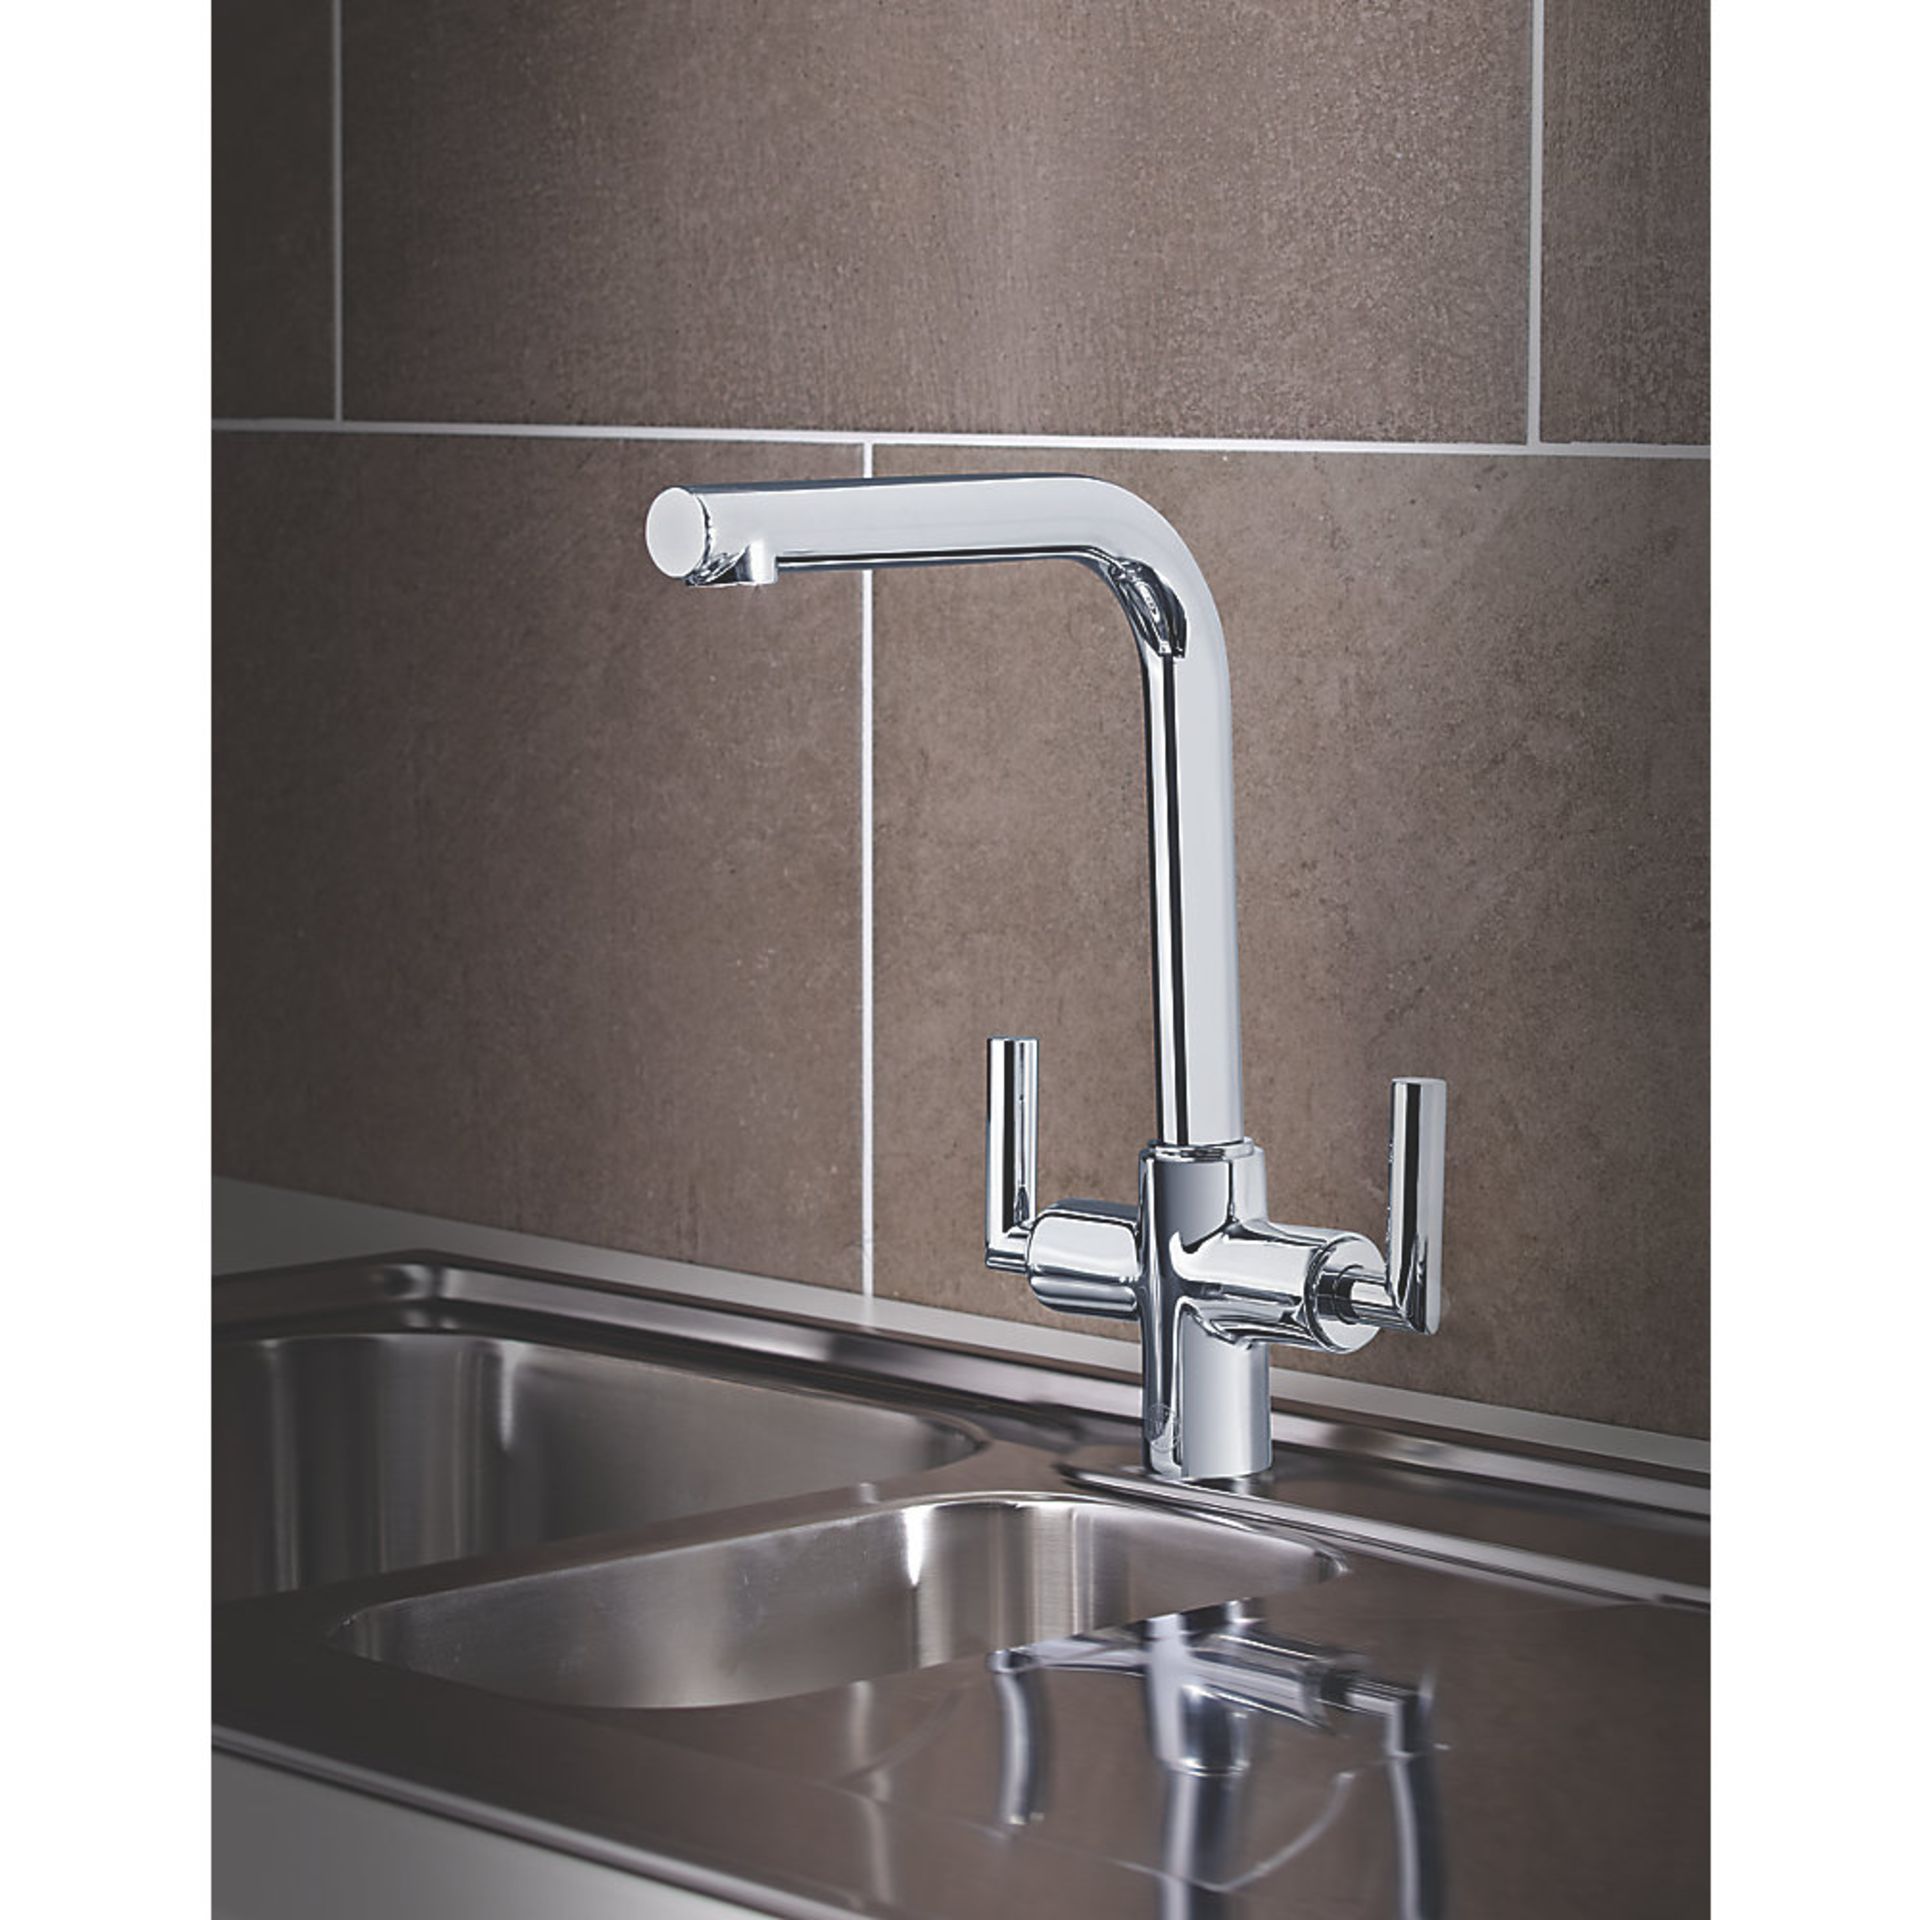 (XX70) Heritage Dolce Dual-Lever Mixer Tap Chrome. Double Lever Operation _ Turn Deck-Mounte...